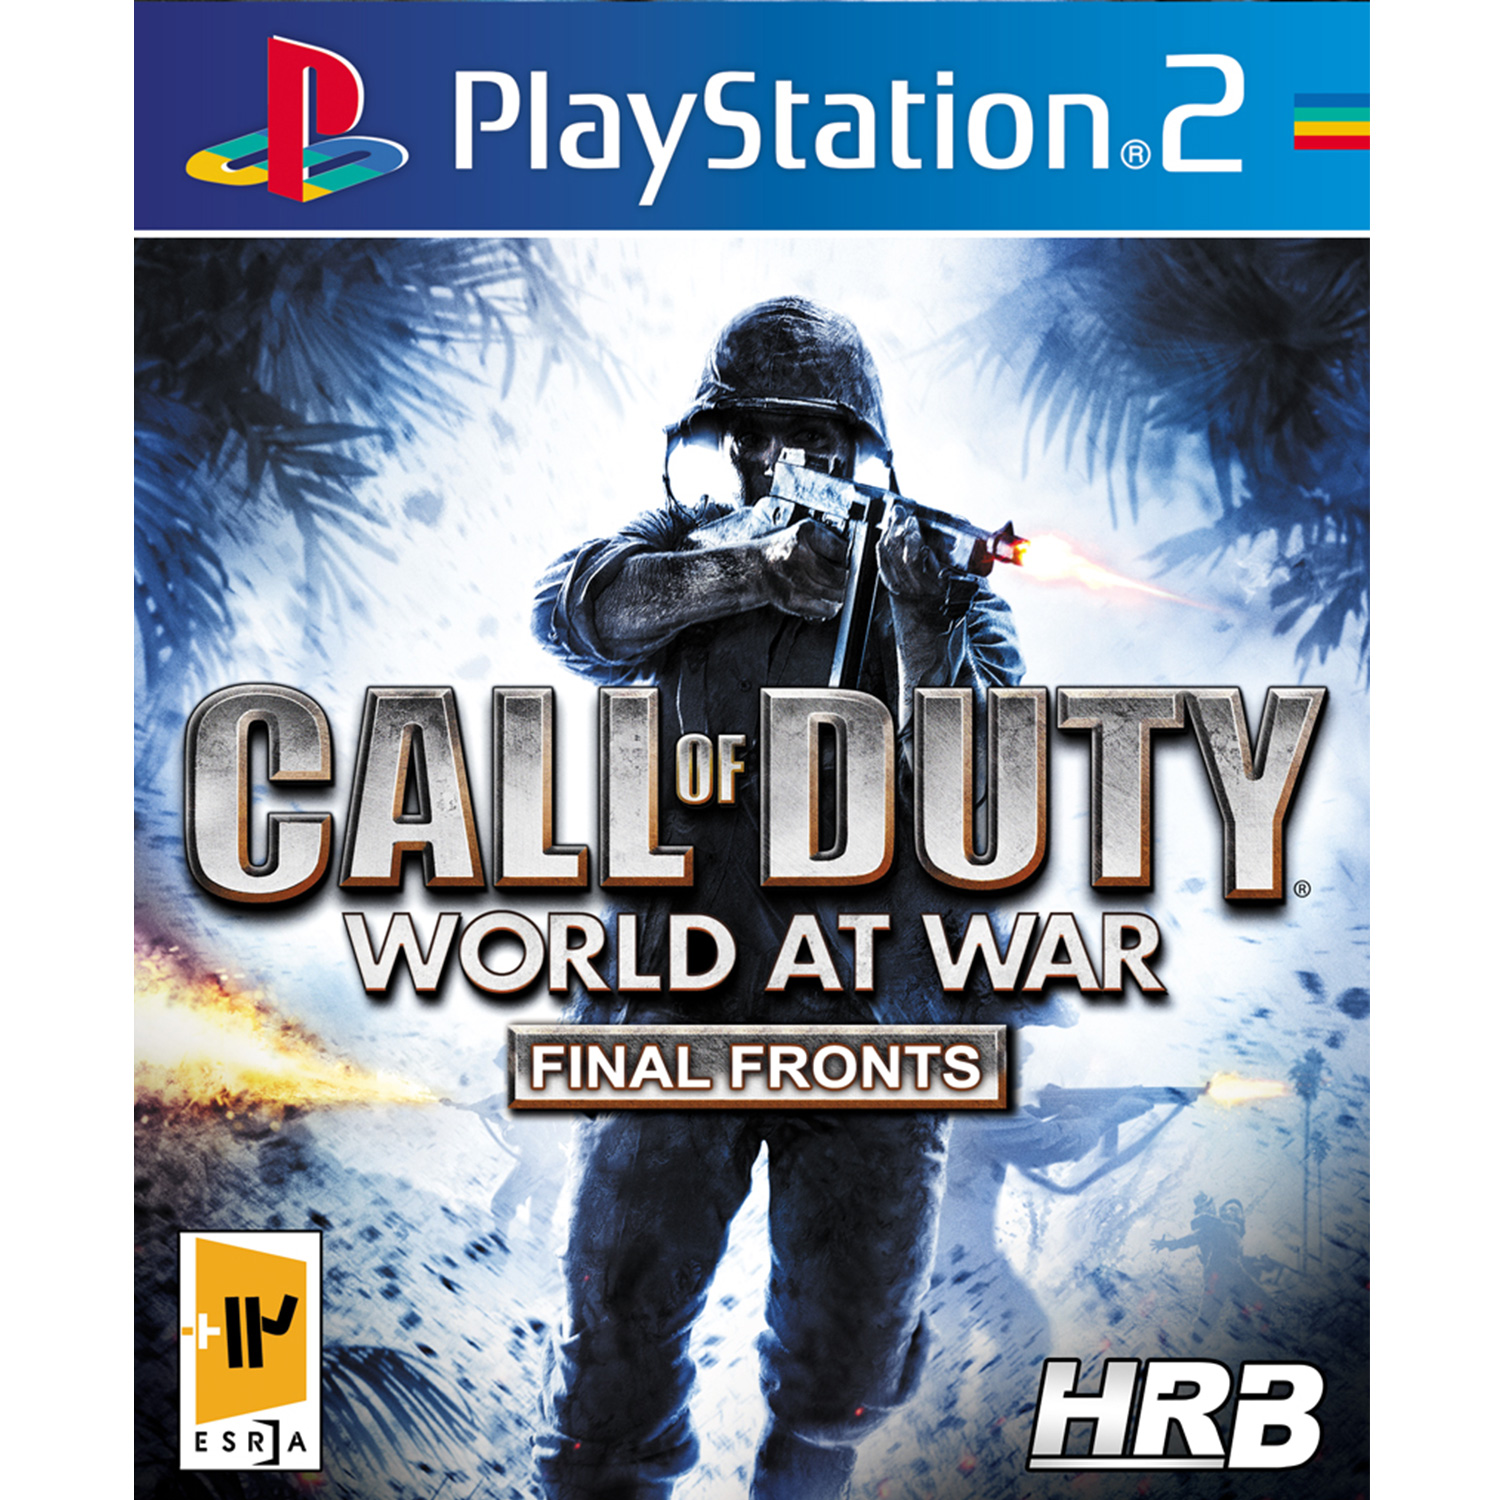 Call of Duty World at War Final Fronts & 4 Other Games Set (PlayStation 2  PS2)